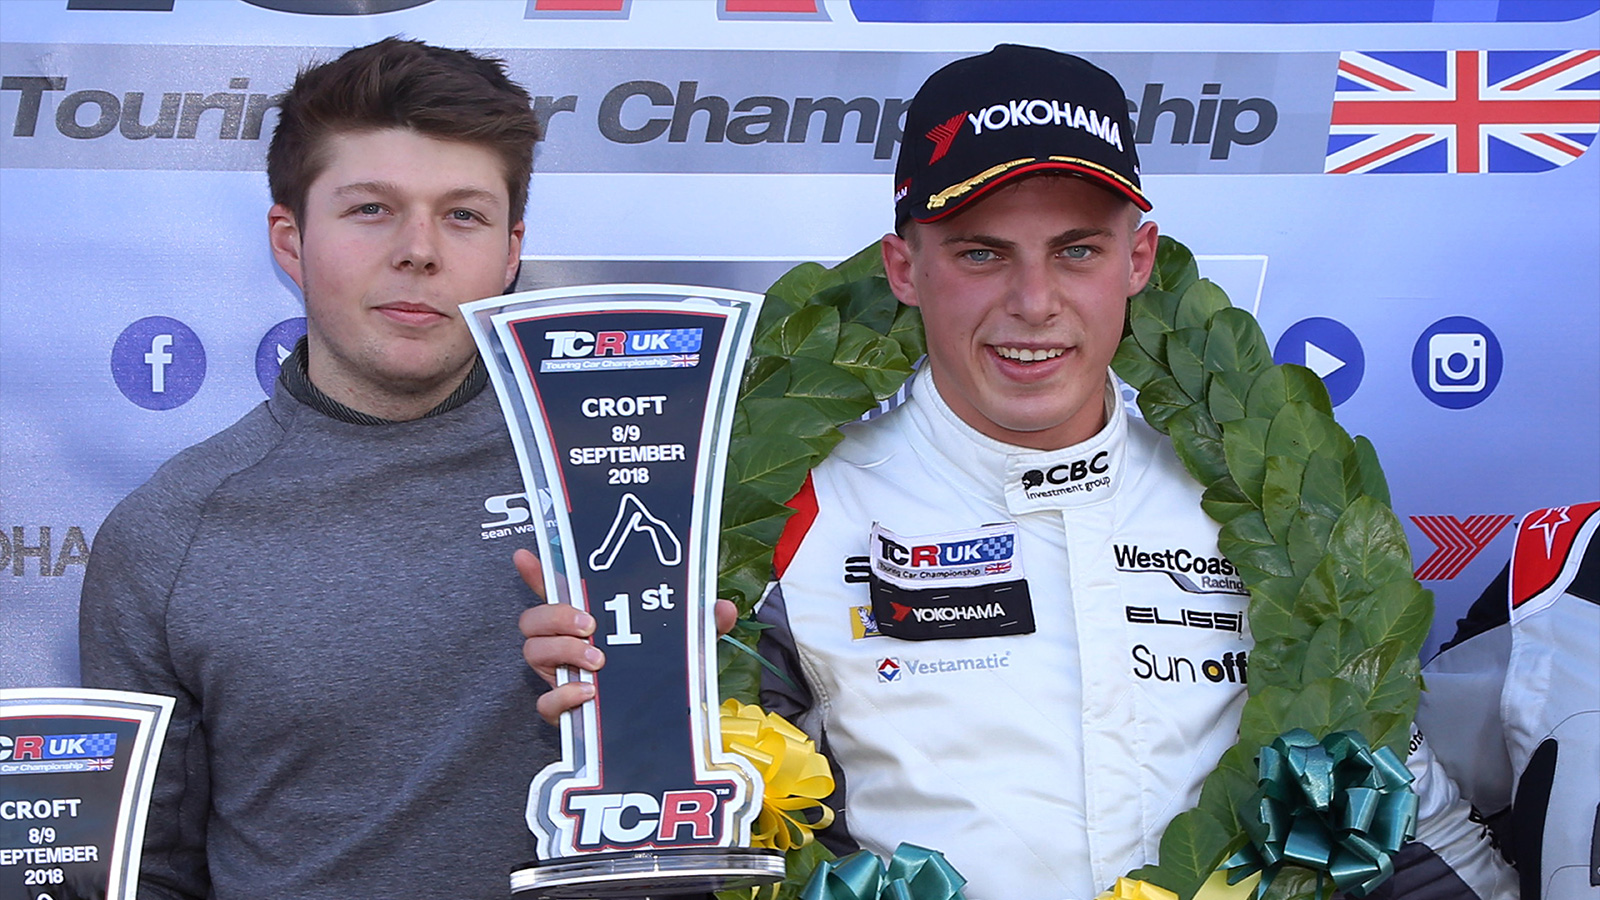 Fantastic double podium at Croft with P3 finish in Rd12.